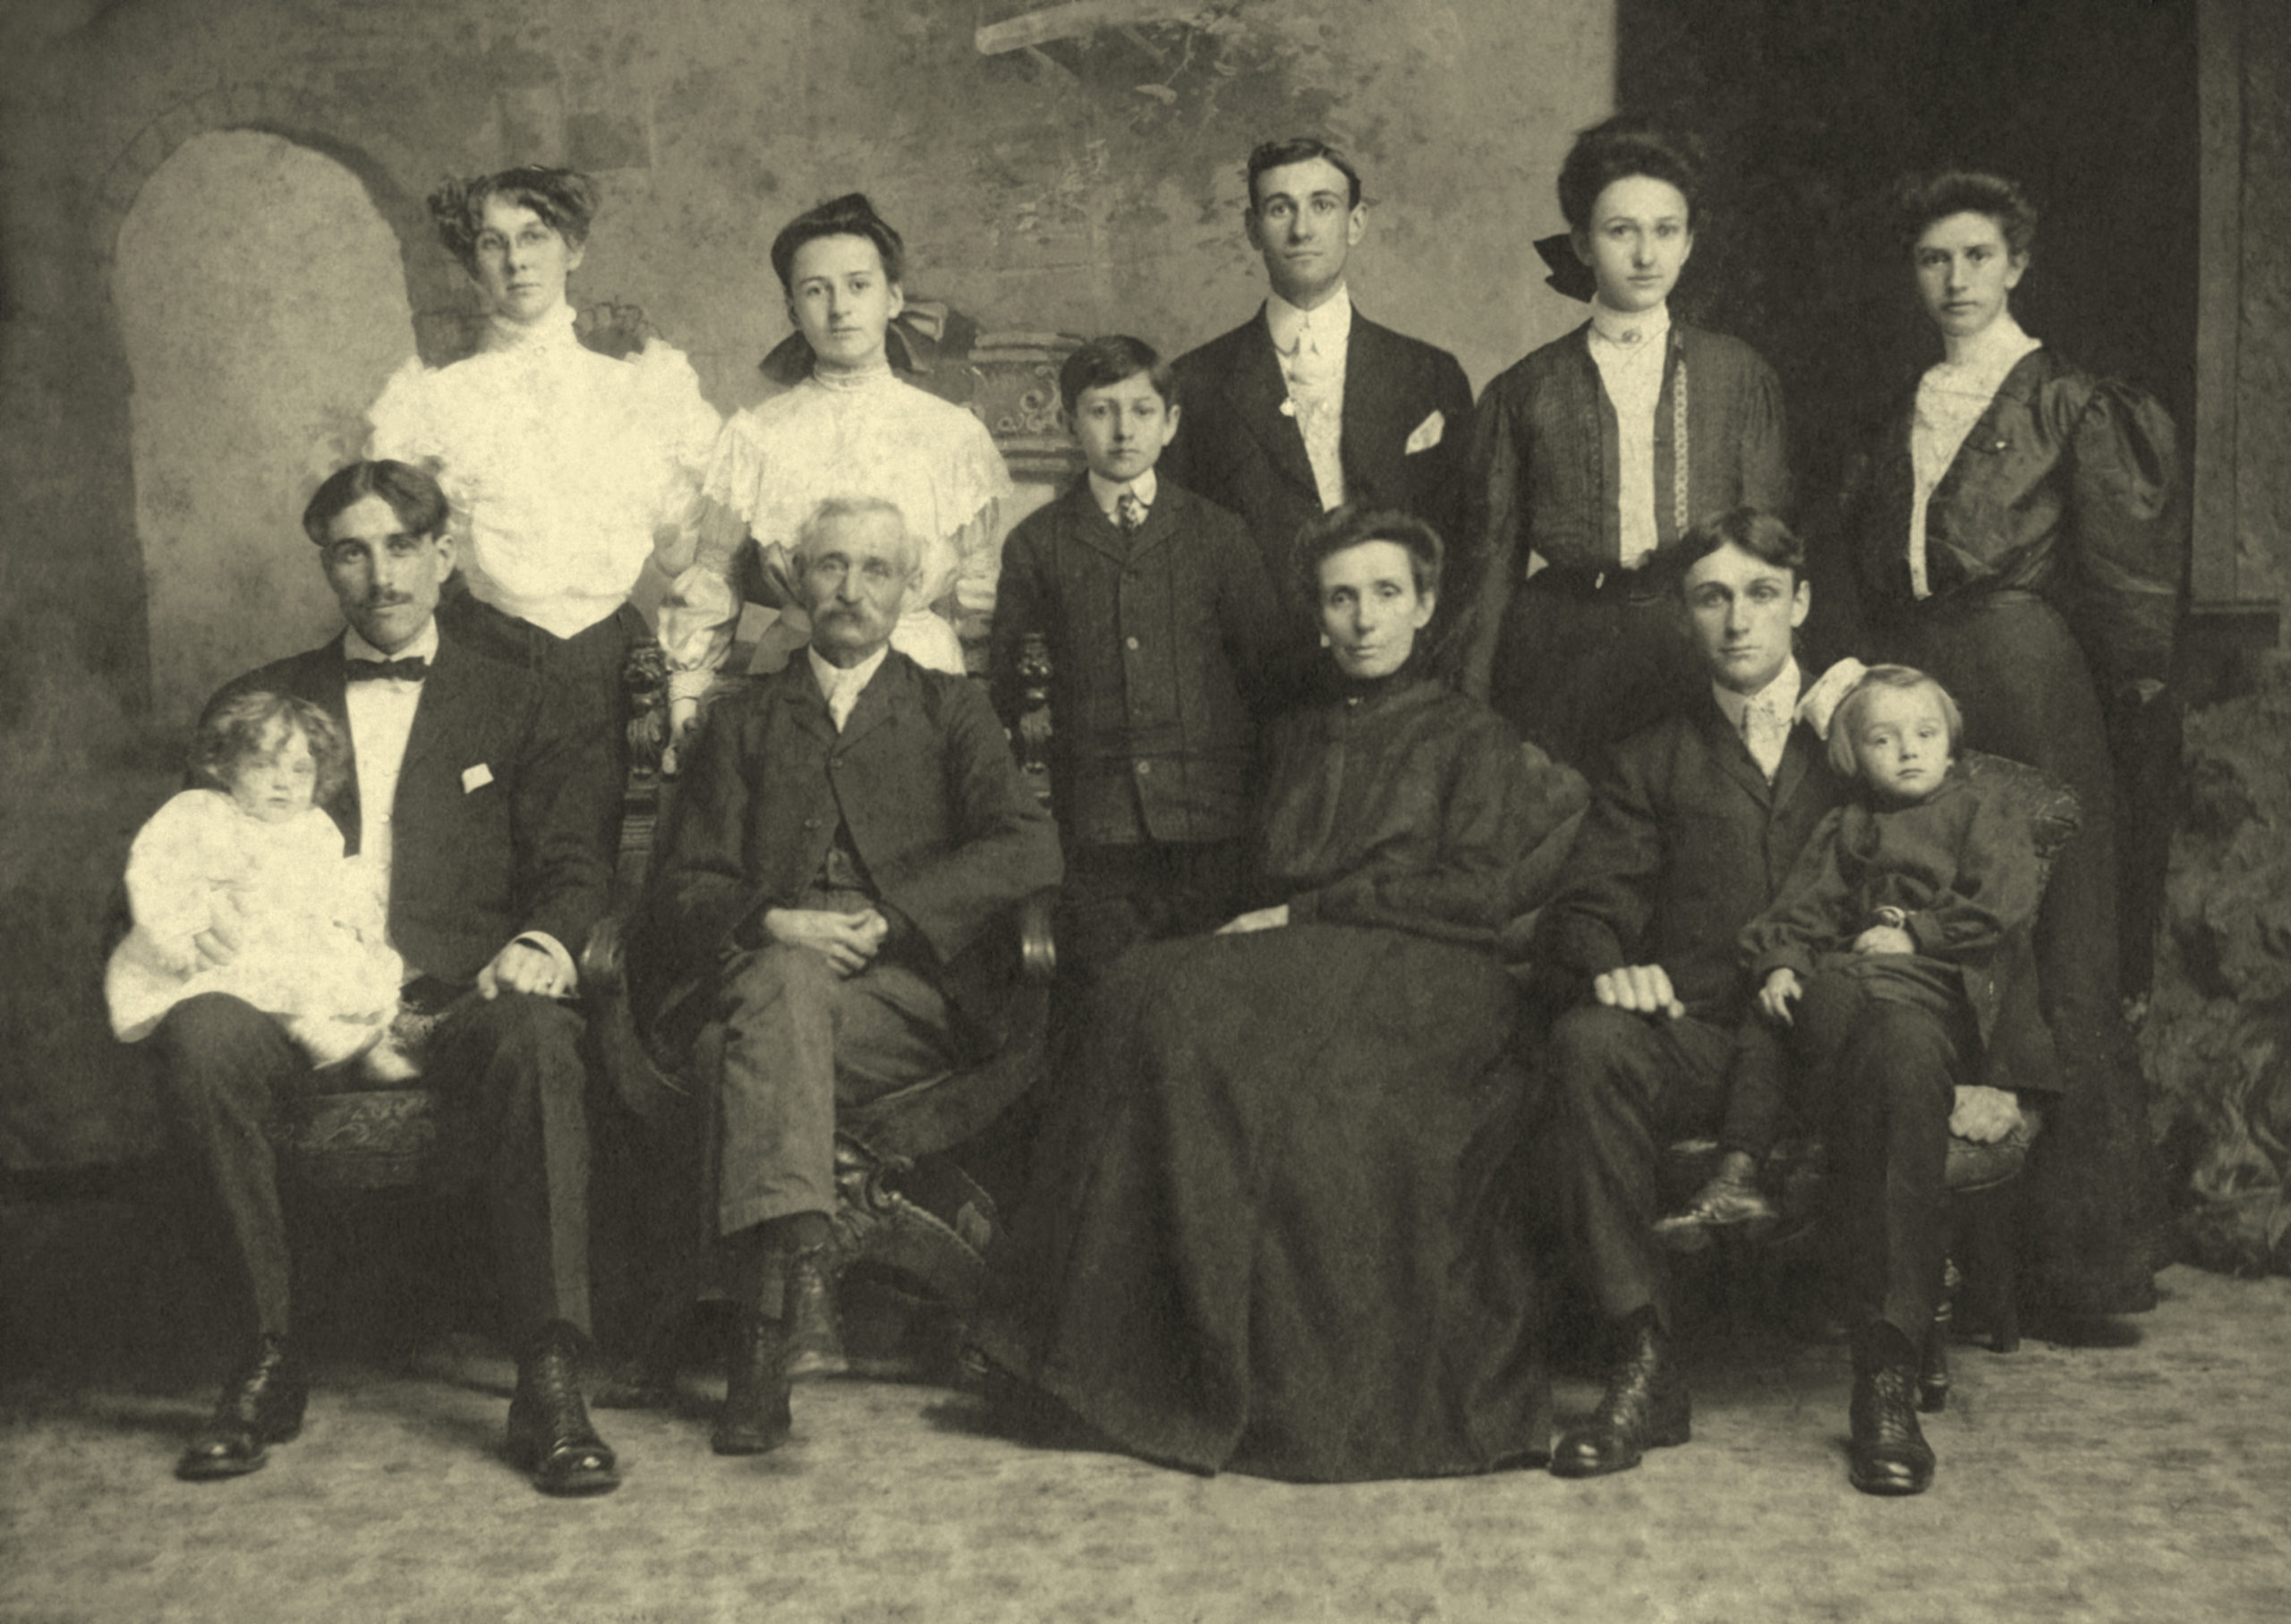 Back: Clara Galvin Sheldon (Sam's wife), Mary Elizabeth (youngest daughter of Harvey and Mary), Harold Horton (youngest son), Burt, Sarah Maude (Sadie), Anna Champion (LD's wife) Seated: Samuel Sheldon holding daughter Thelma, Harvey (father of the family), Mary Christian (mother), LD holding son, Harold